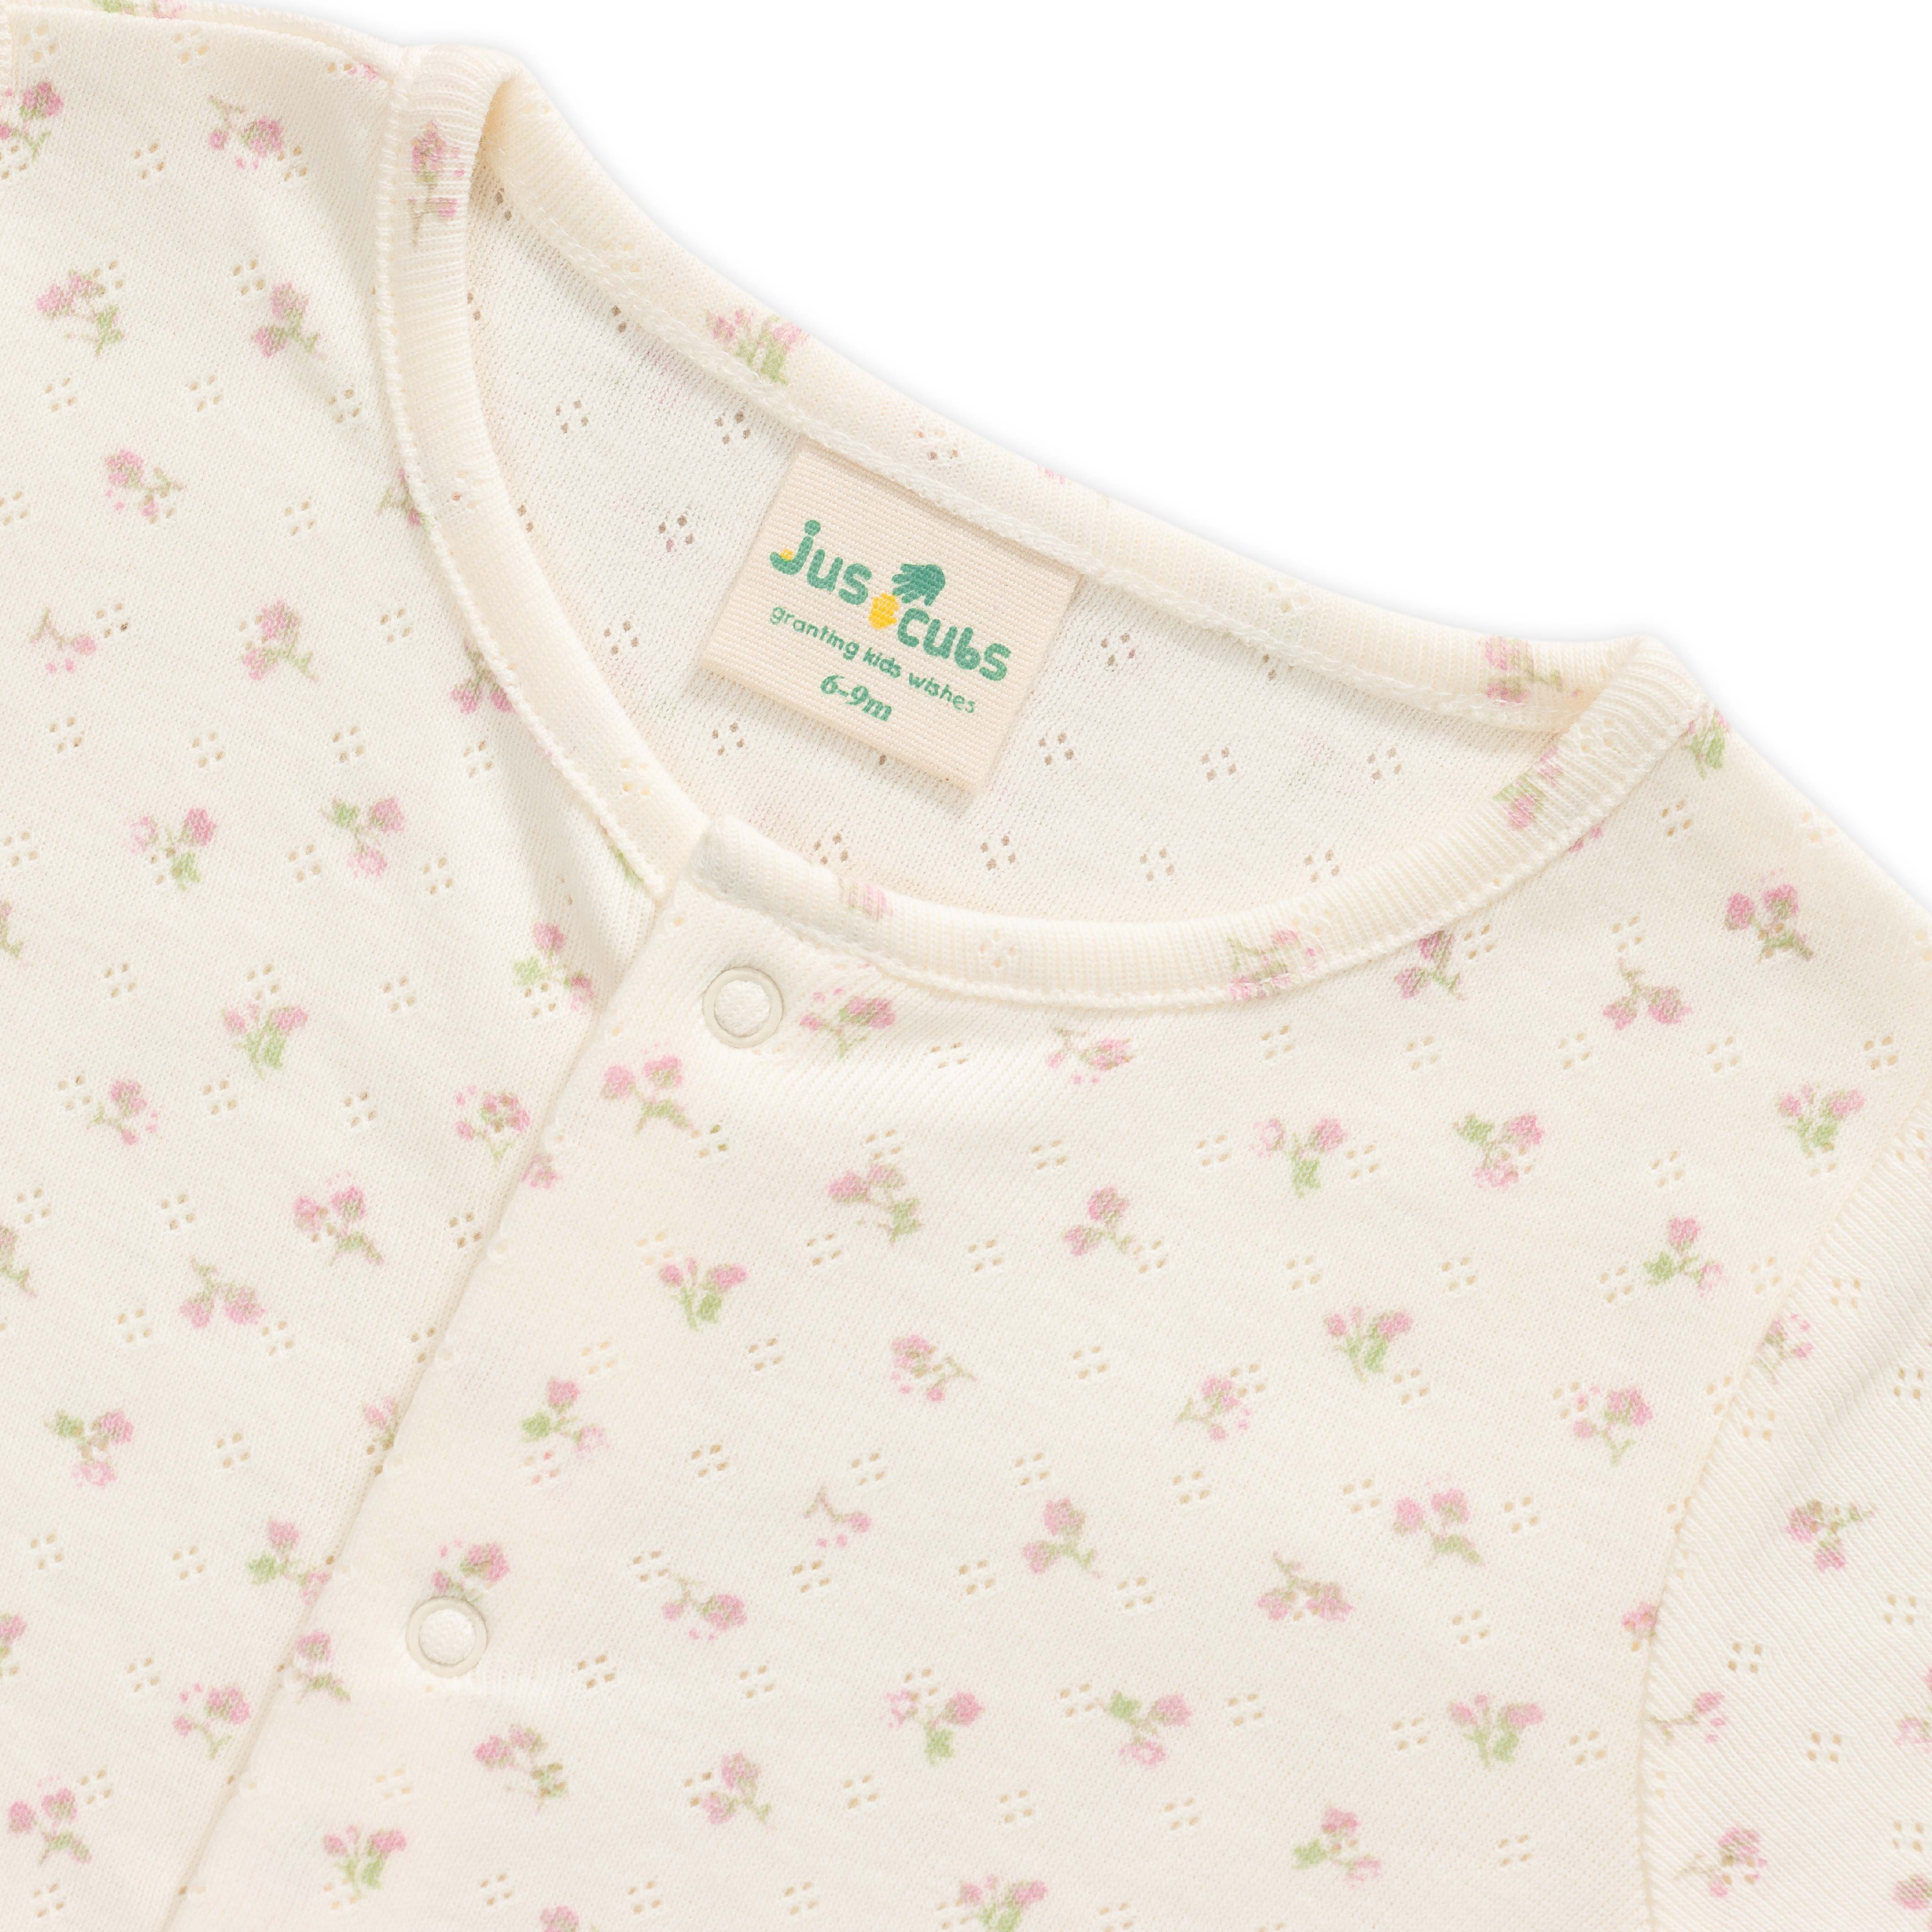 Baby Girls All Over Printed Sleepsuit